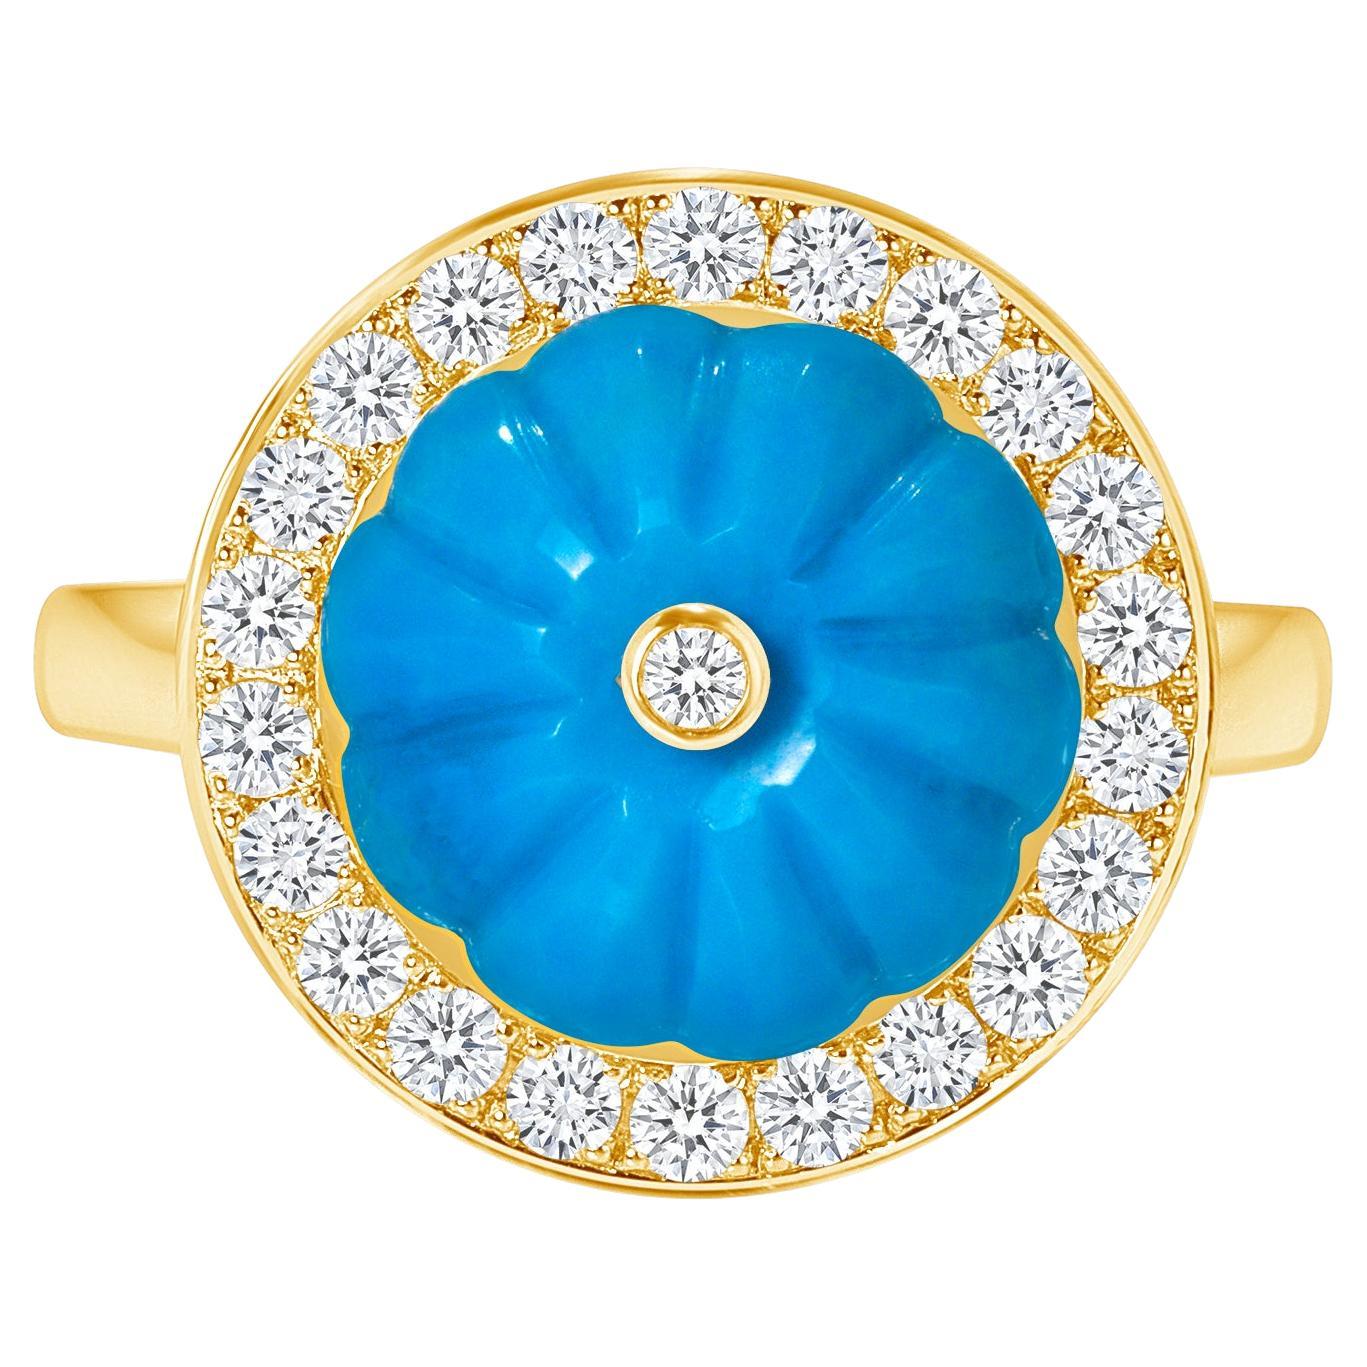 14K Yellow Gold Art Deco Cocktail Diamond & Hand Carved Centered Turquoise Ring 